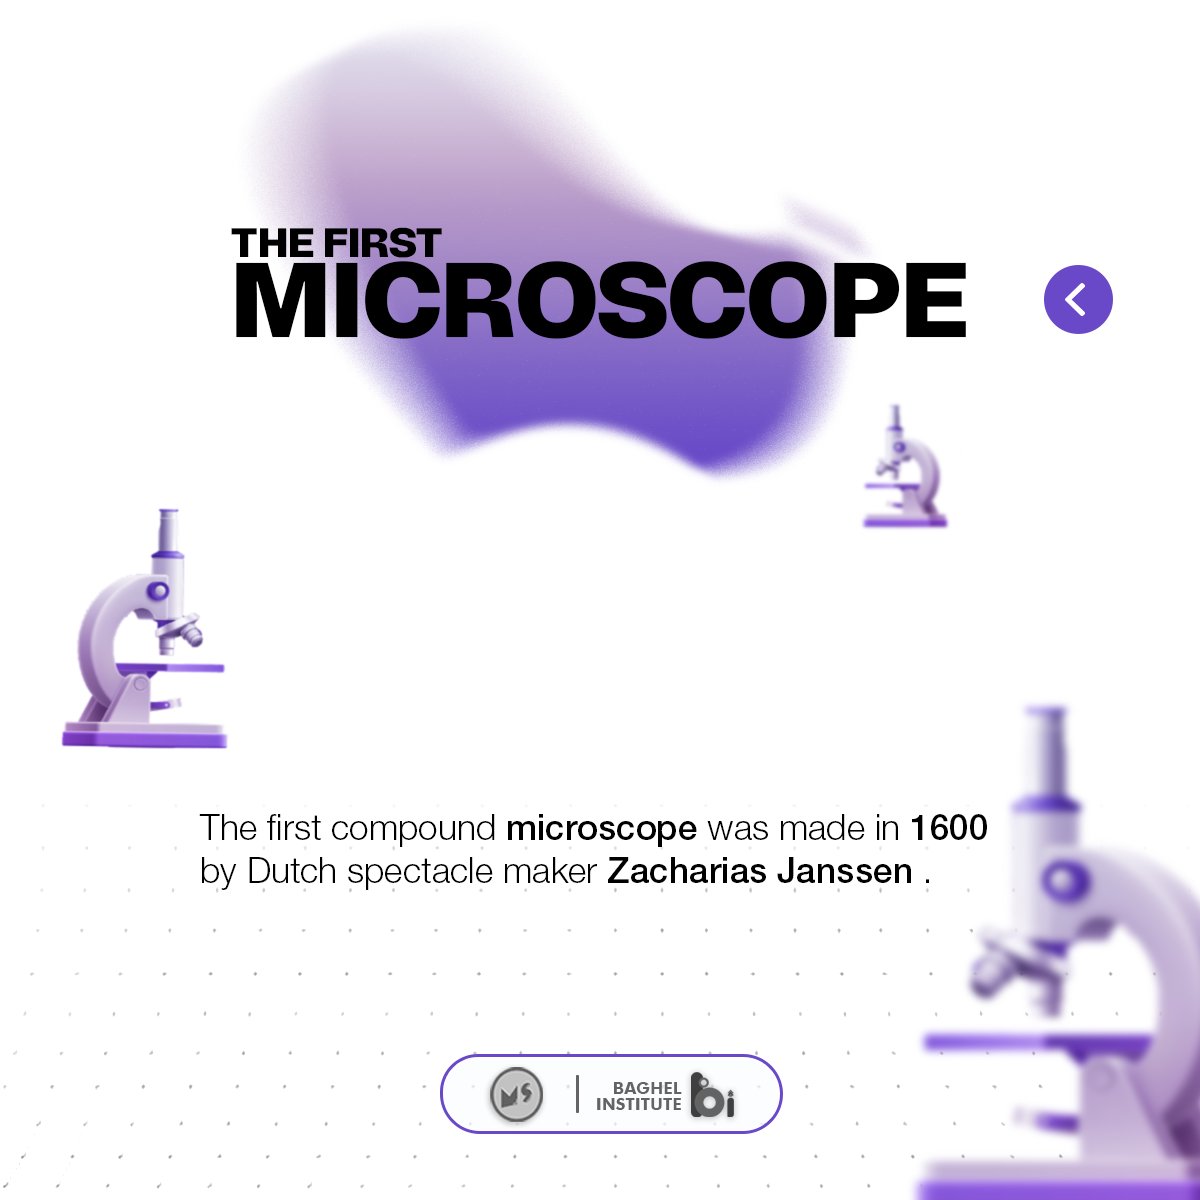 The first microscope was made in 1600 by Zacharias Janssen !!!!
#FirstMicroscope #MicroscopeAdventures #MicroscopeBeginner #MicroscopeLove #FactOfTheDay #EducateYourself #InterestingFacts #FactsOnly #study #boostyourknowledge #learn #baghelcomputercentre #miniatureschool